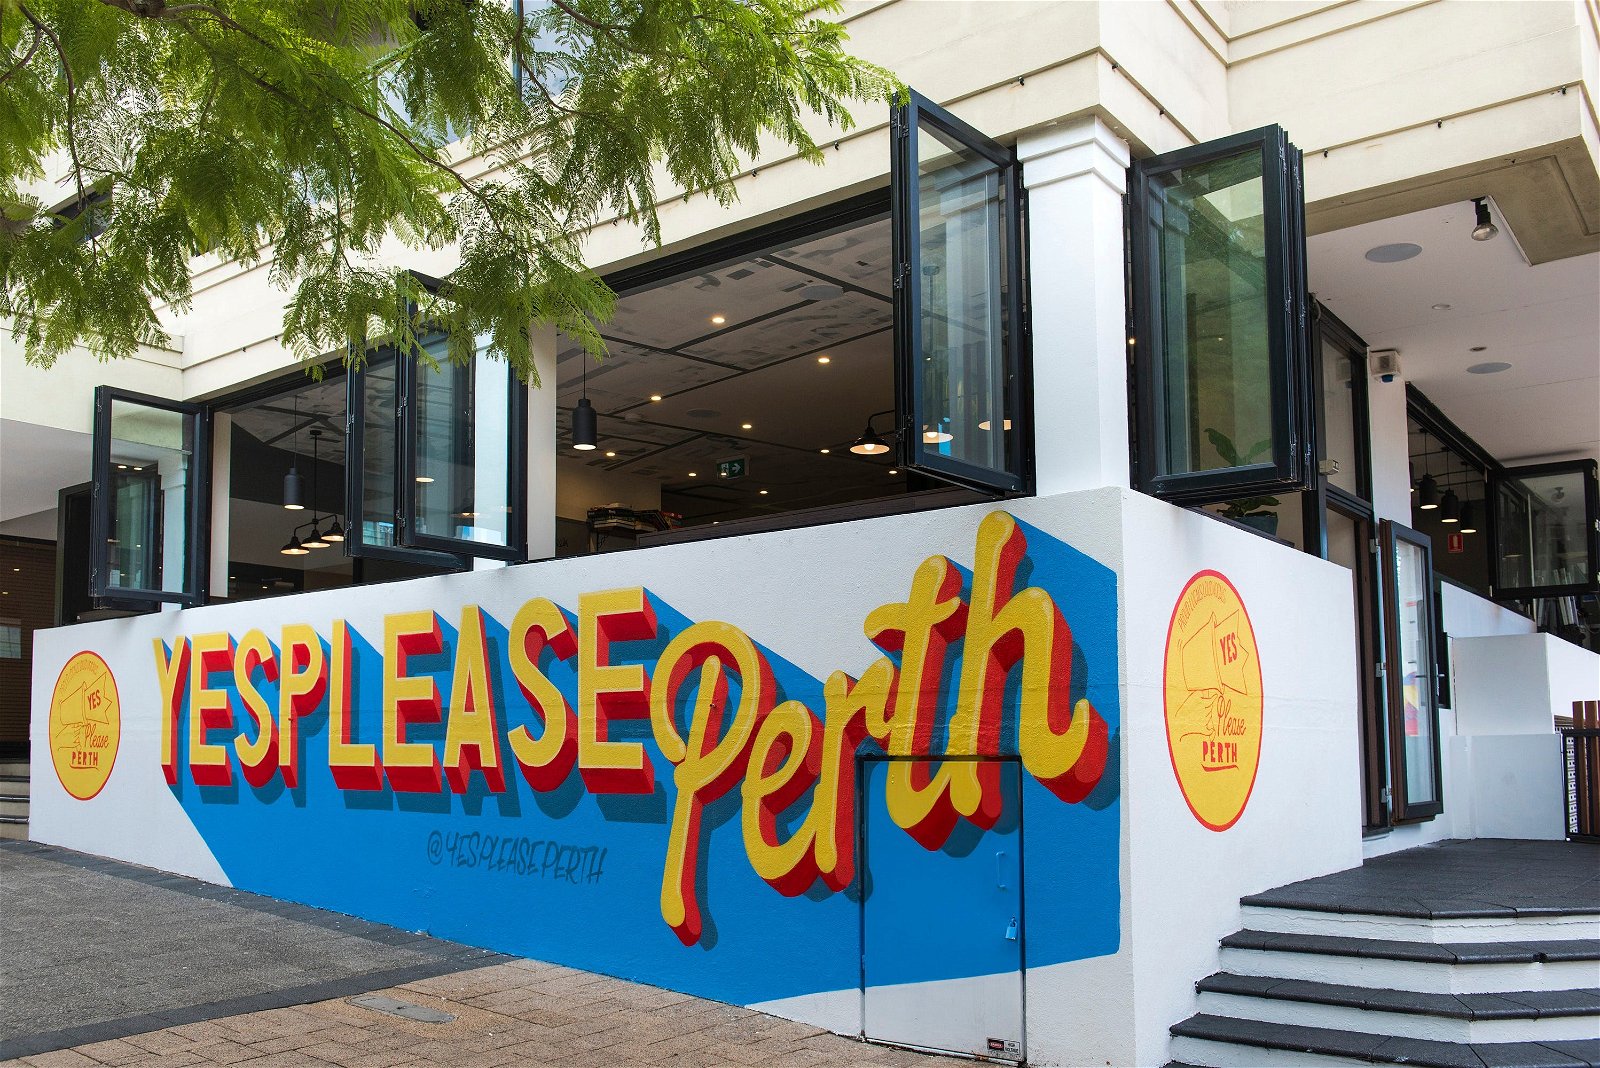 Yes Please Perth - Surfers Paradise Gold Coast